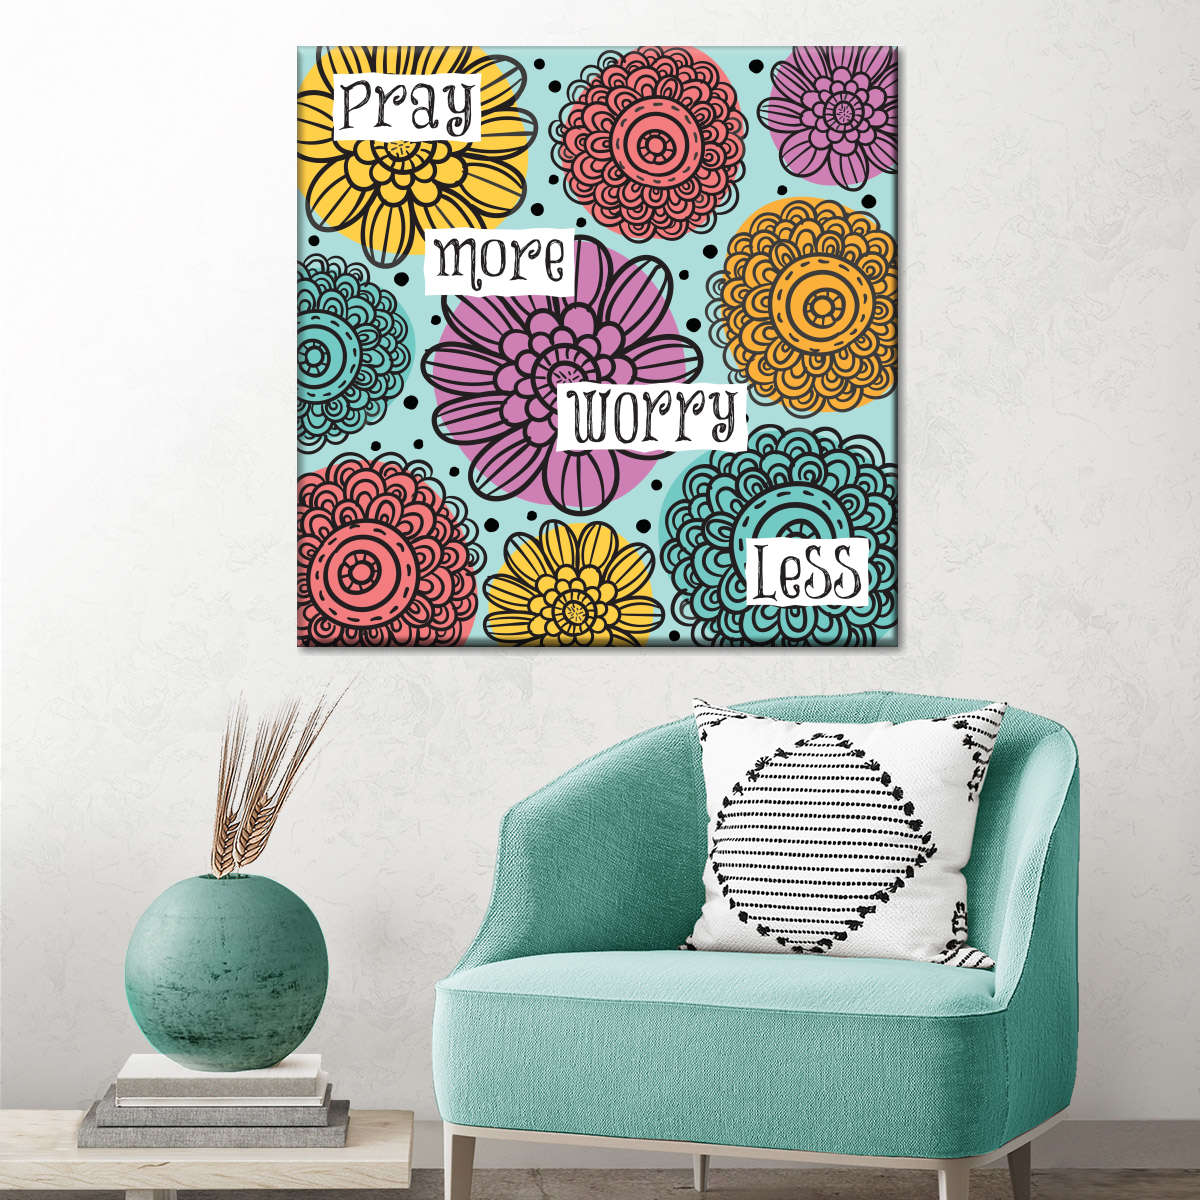 Pray More Worry Less Square Canvas Art - Christian Wall Decor - Christian Wall Hanging